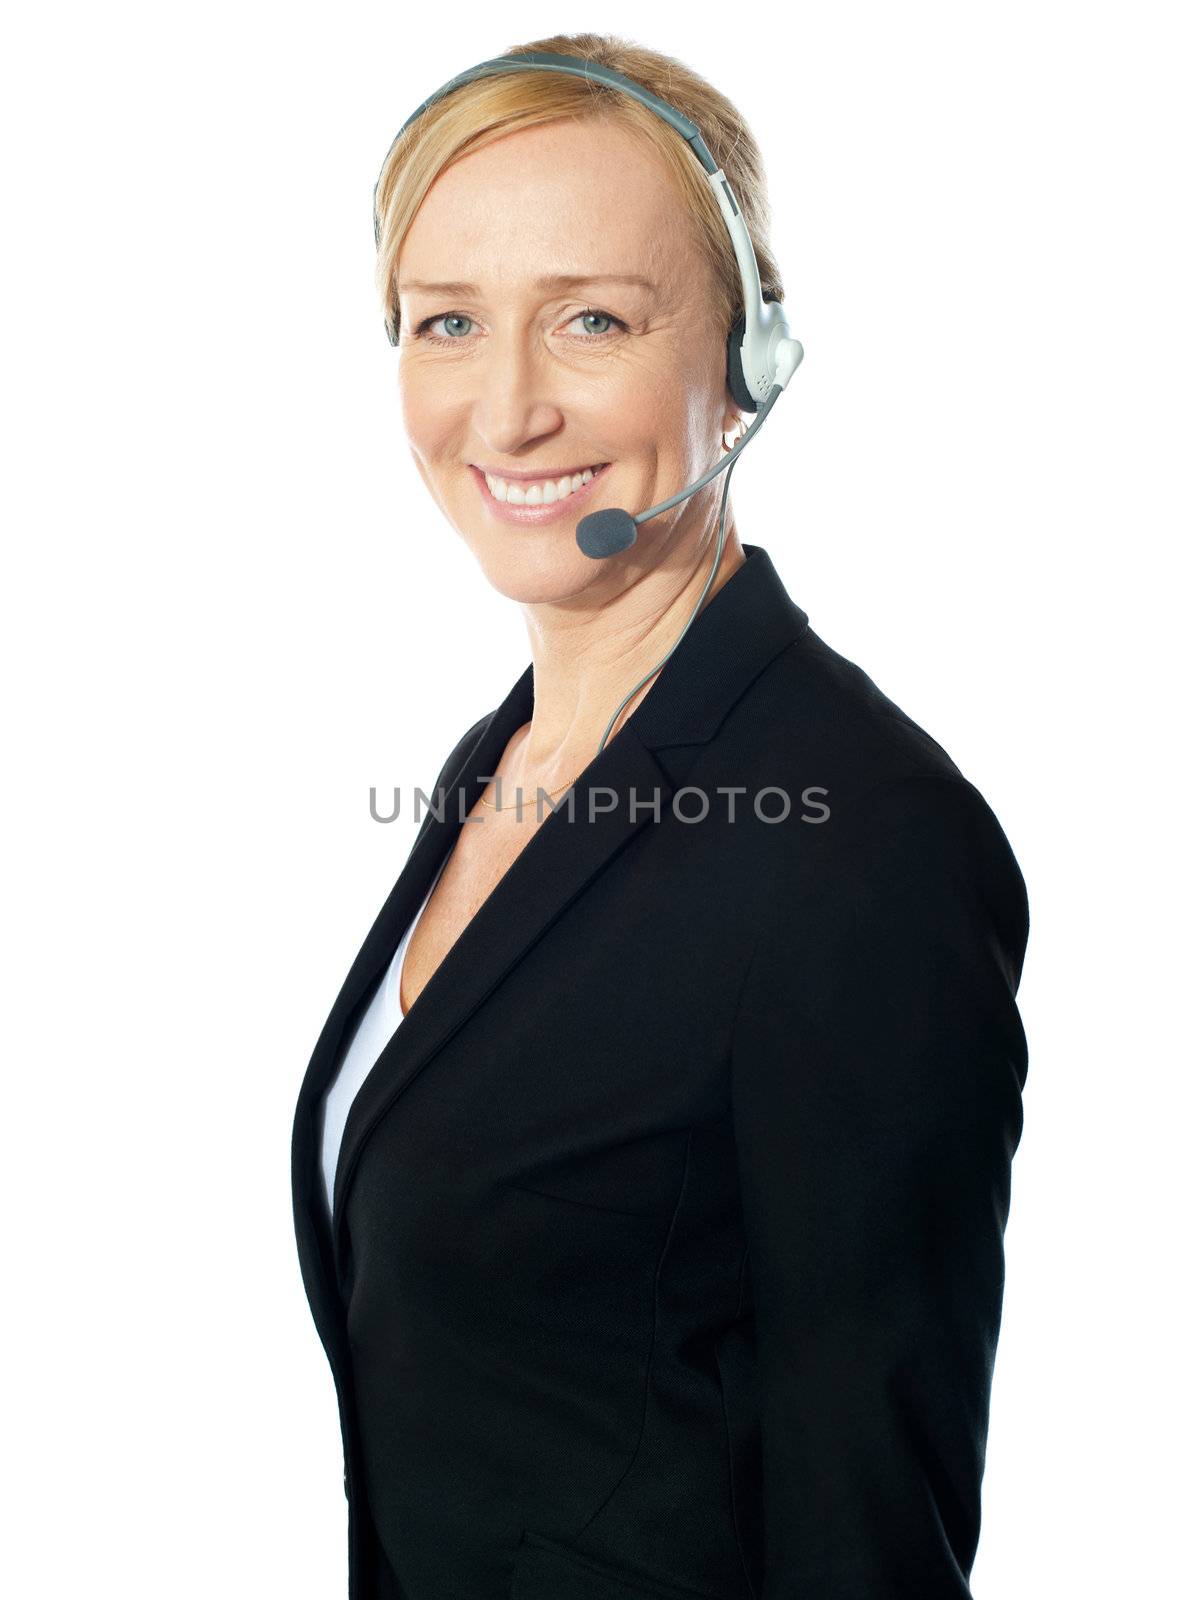 Aged female call centre excutive posing with headsets, smiling